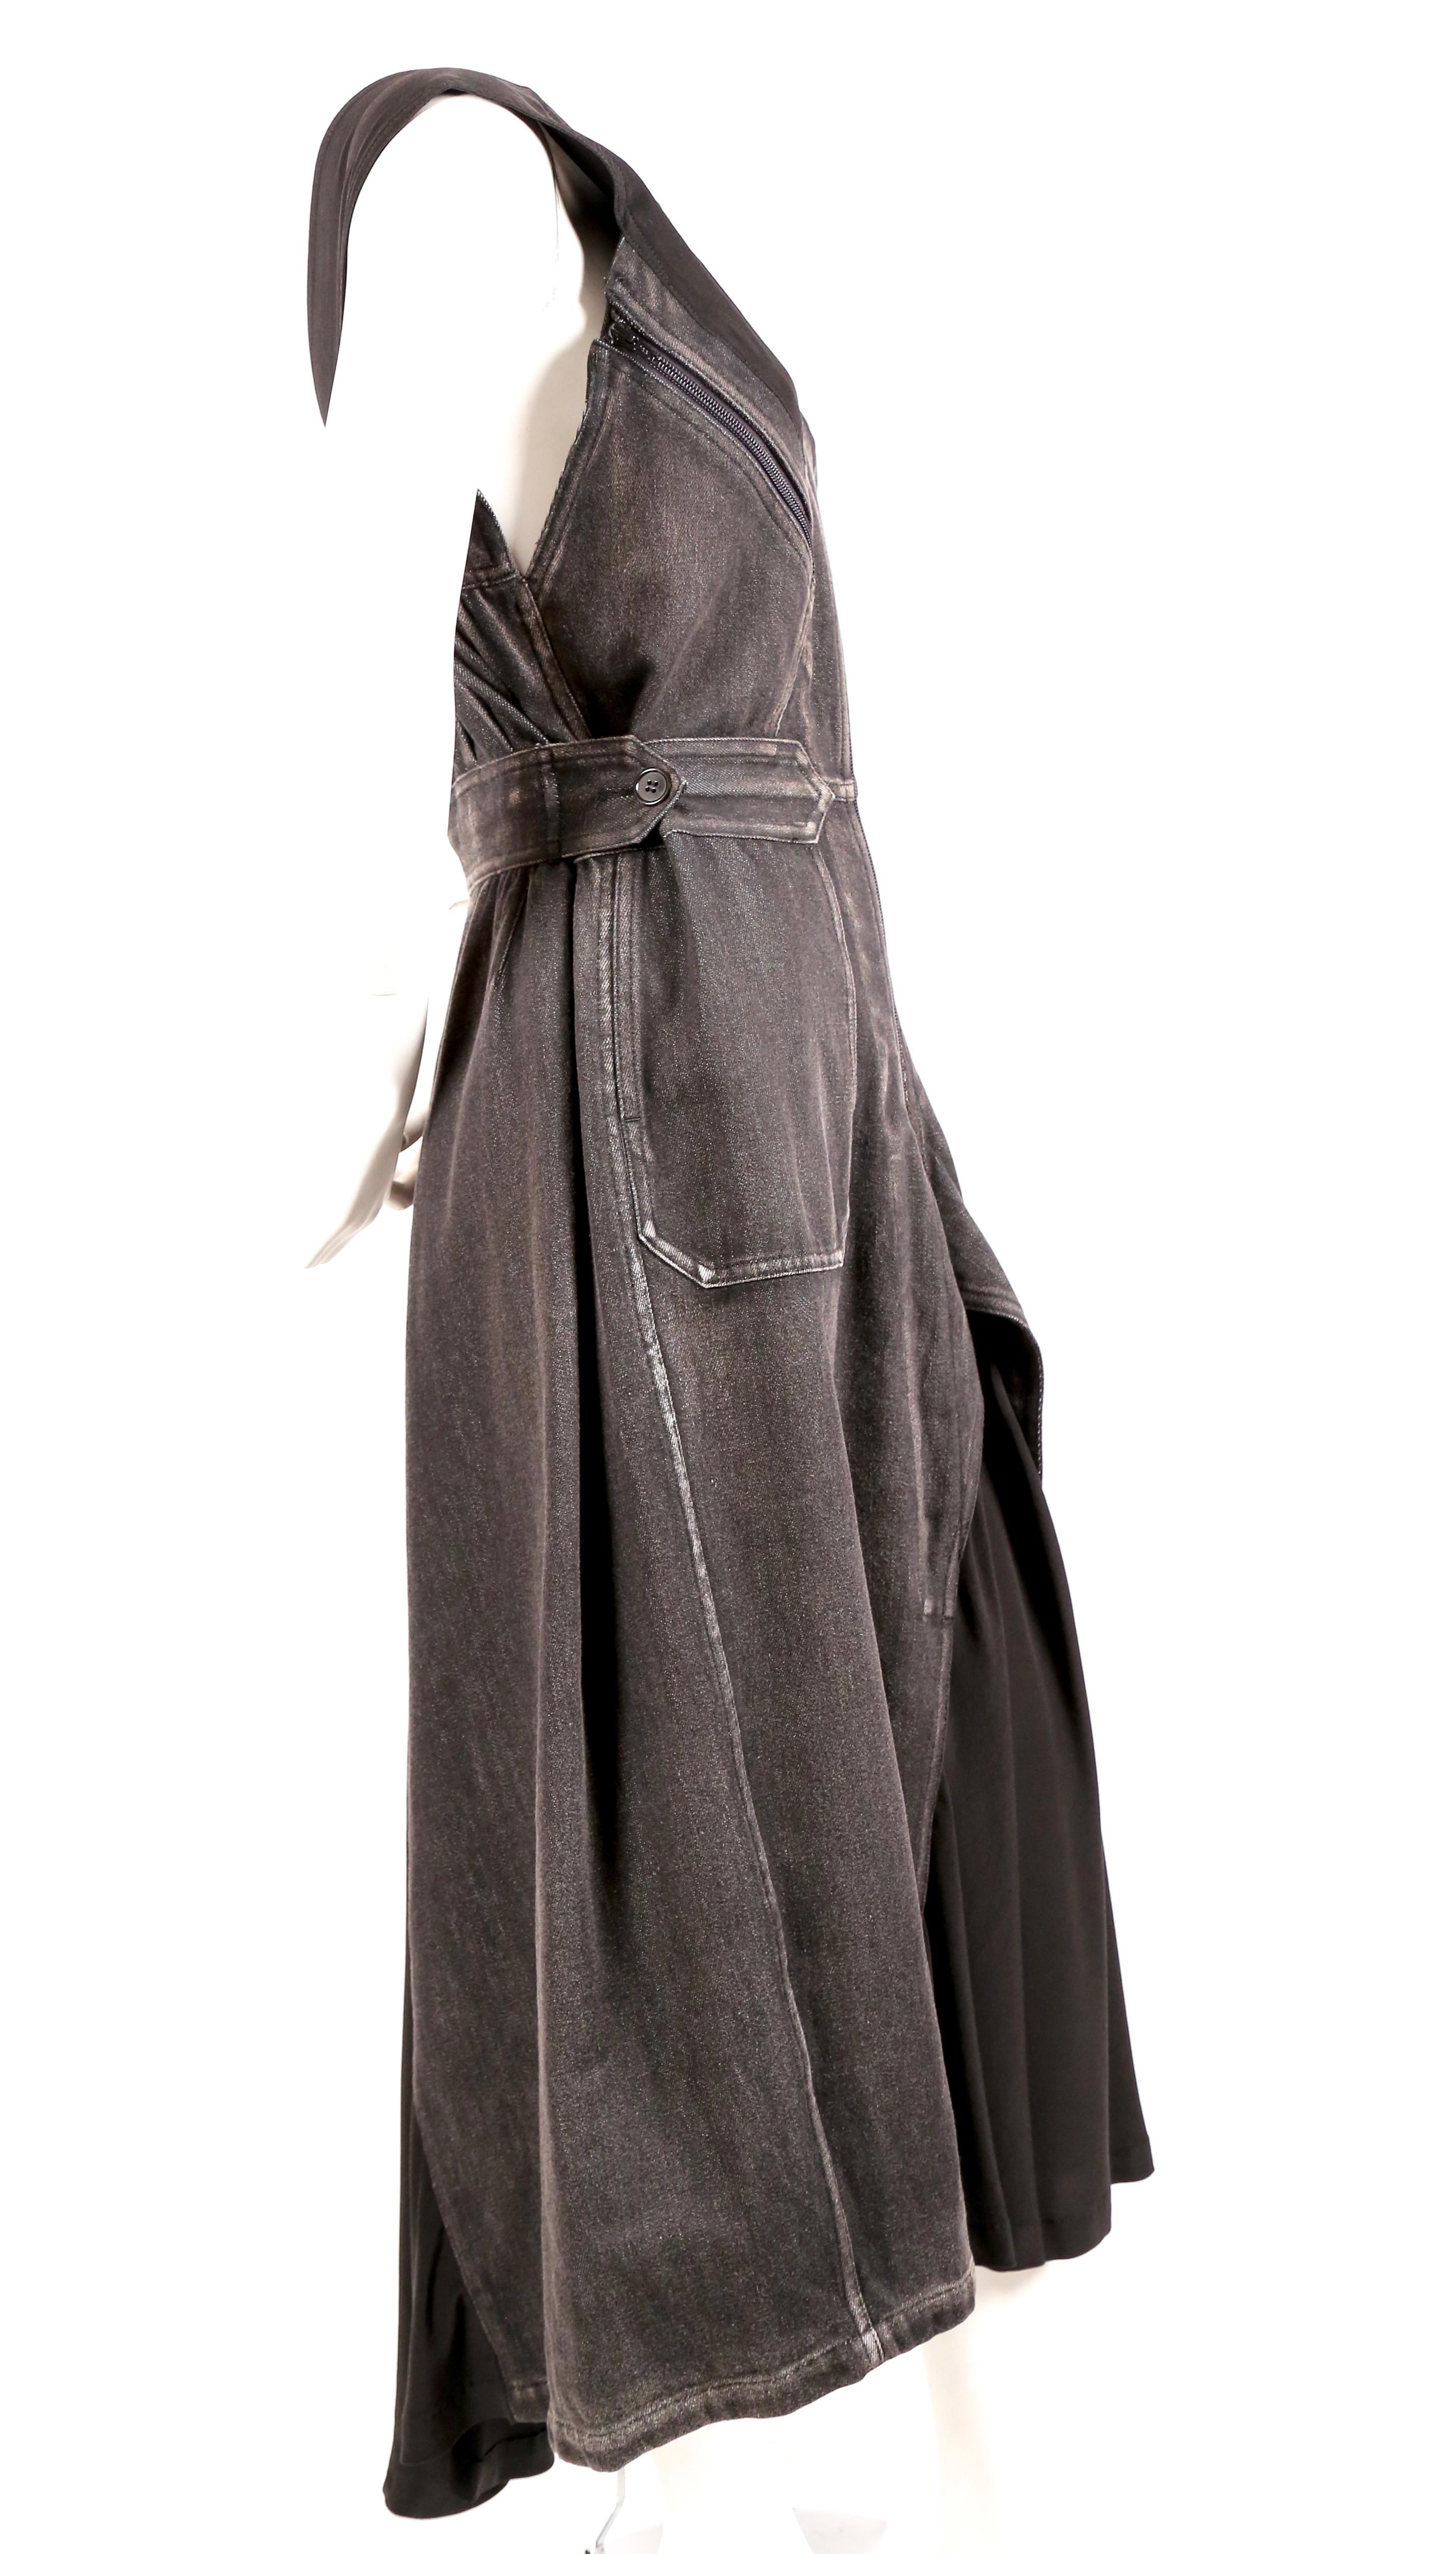 Dramatic, denim dress from Yohji Yamamoto dating to the fall of 2002 exactly as seen on the runway. Made of dark grey/faded black distressed cotton denim with silk/cashmere inserts. Dress can be worn a number of ways. Zips up center front with